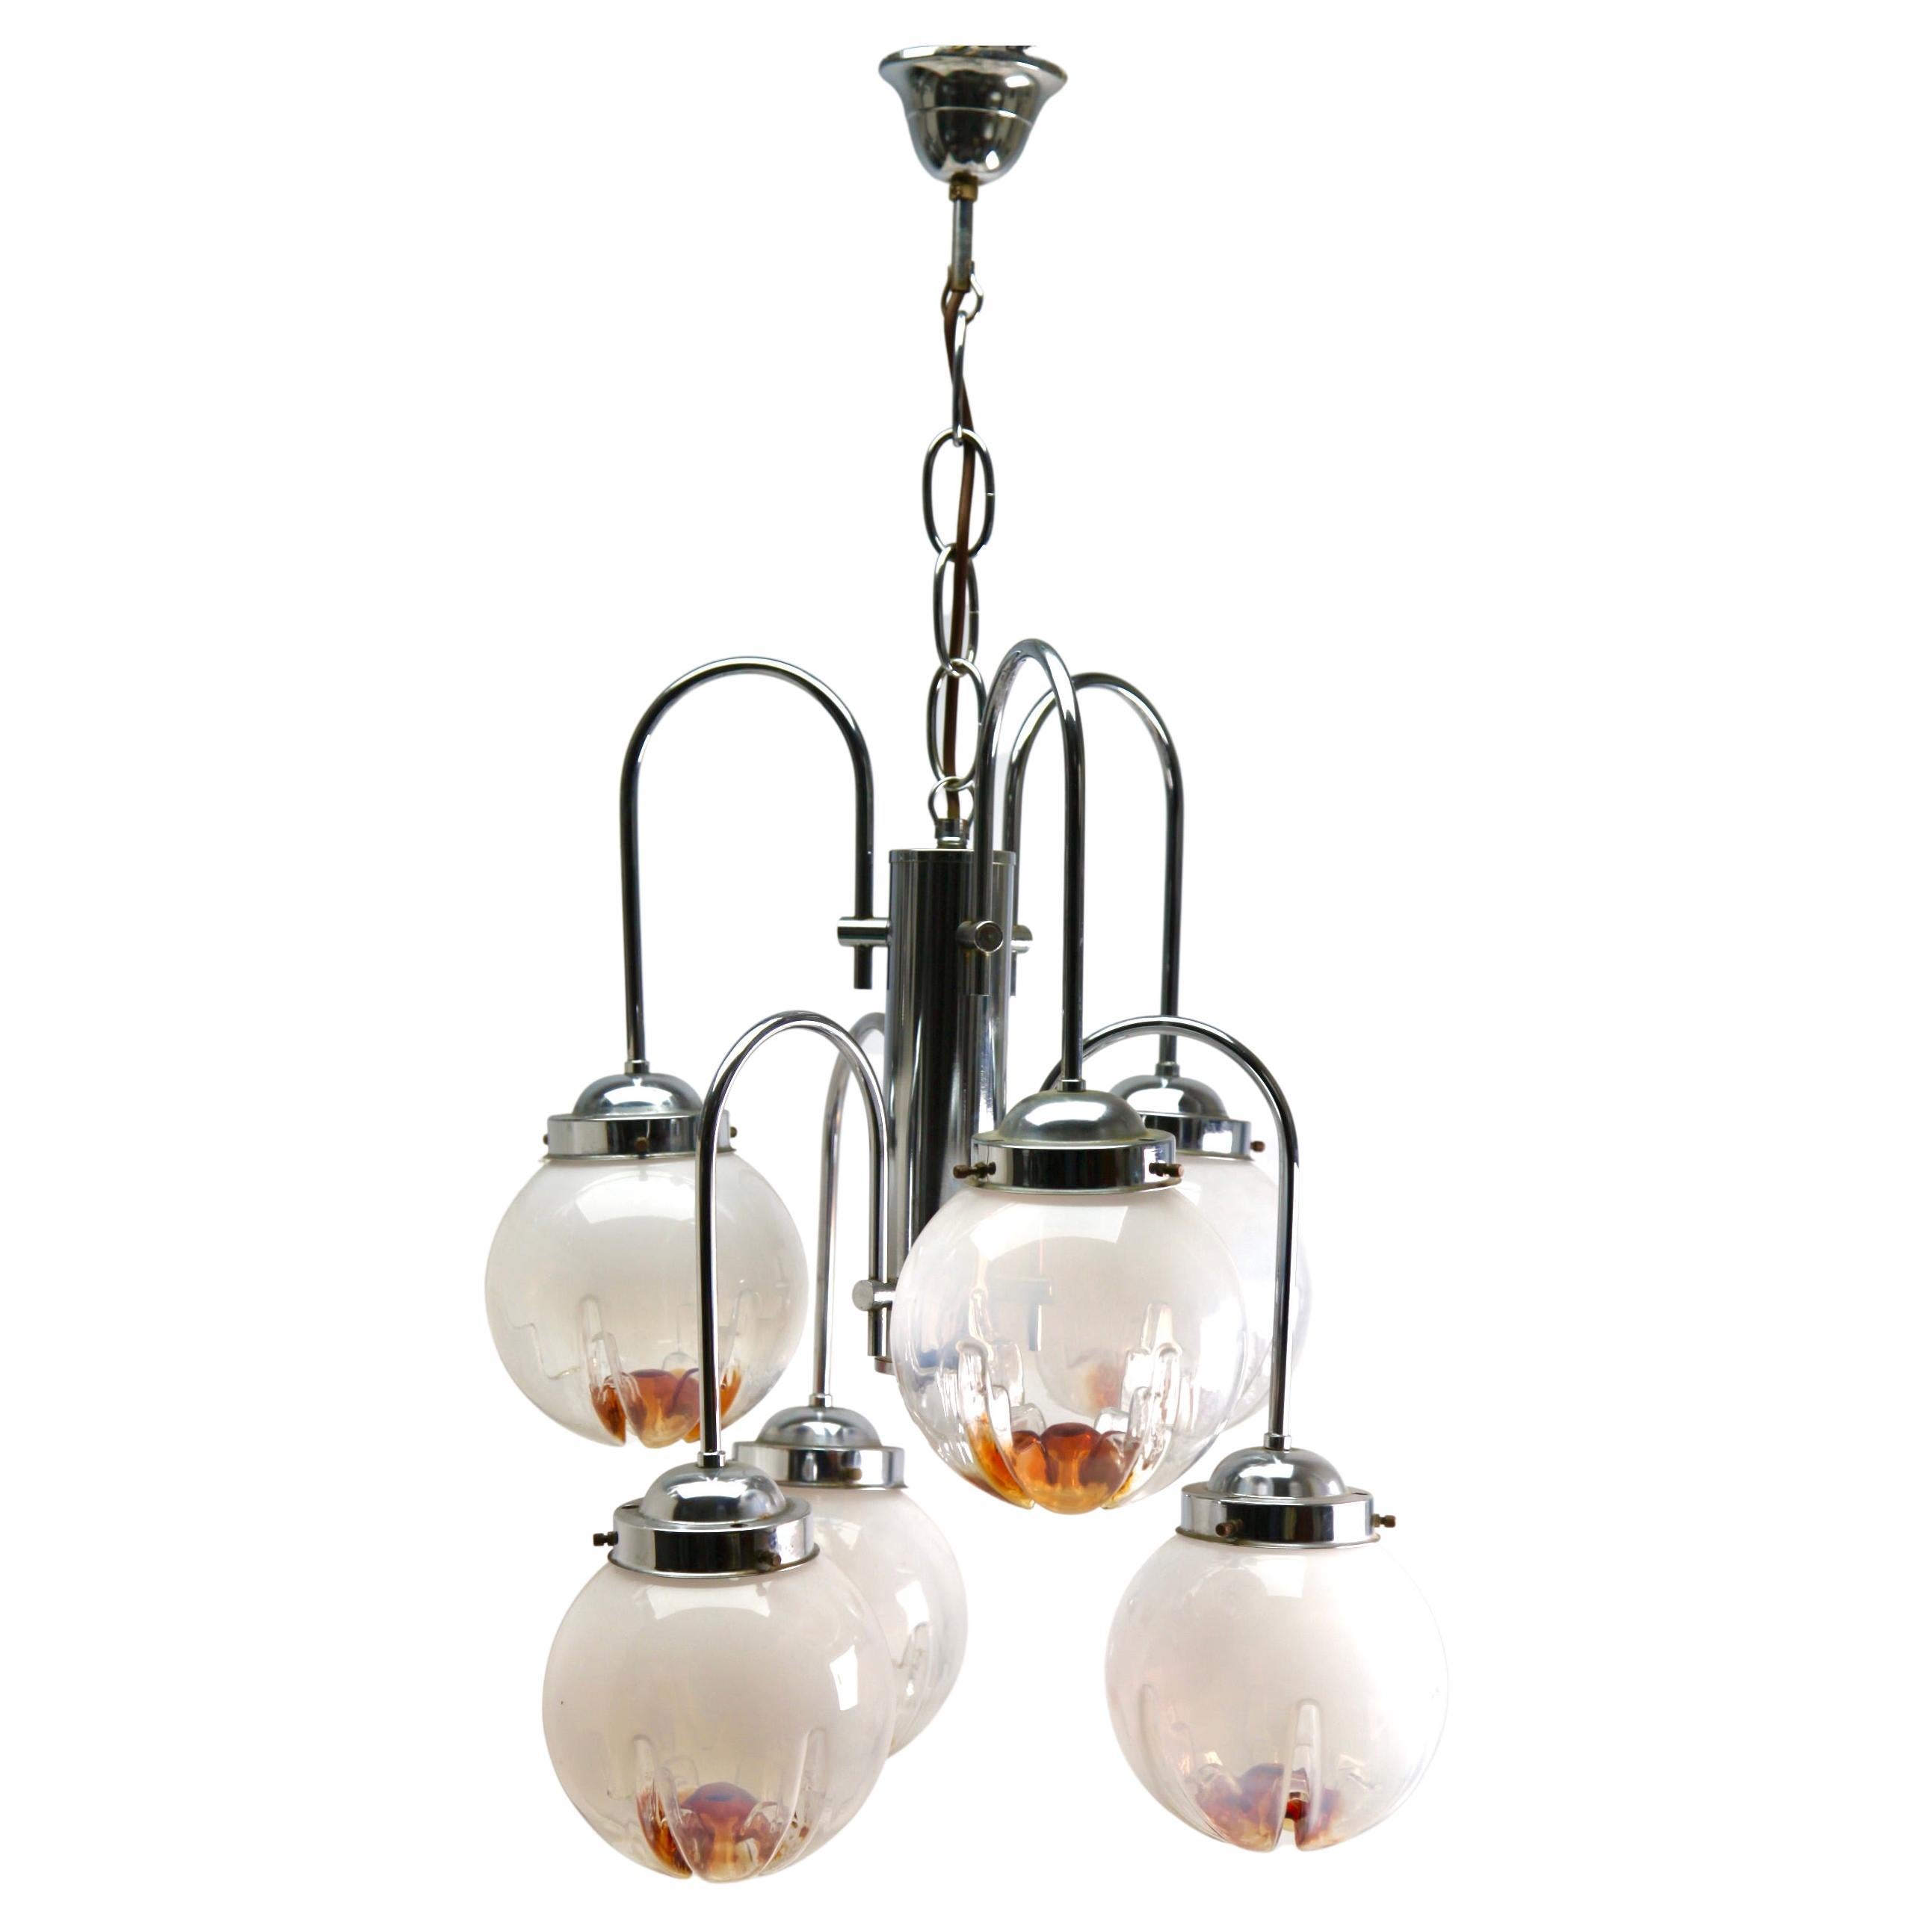 Pendant by Mazzega with 6 Globes of Clear Glass with Orange Inclusions For Sale